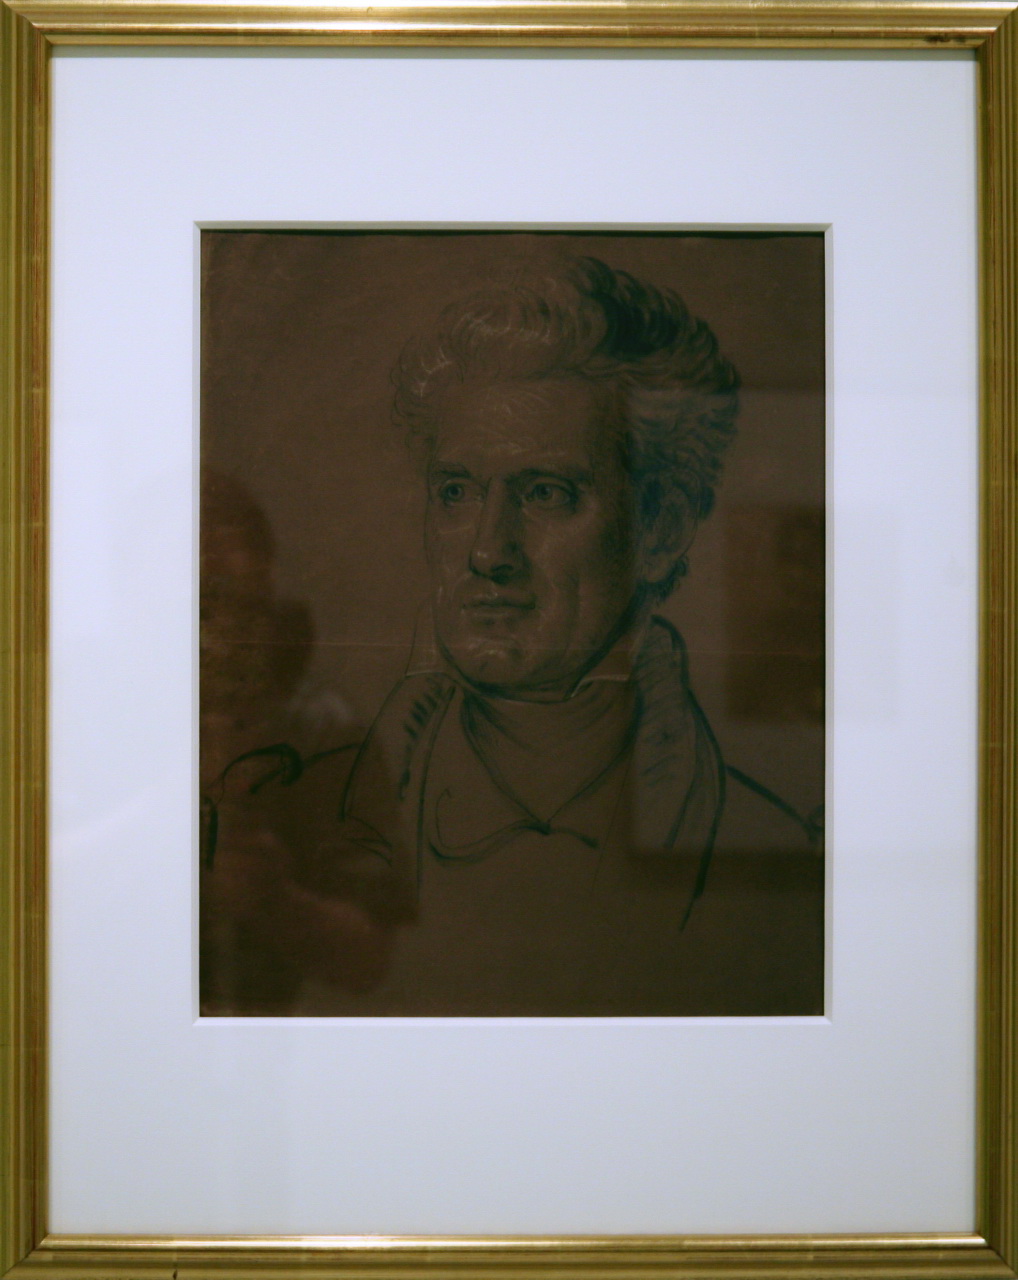 a framed portrait of a man holding a cigarette